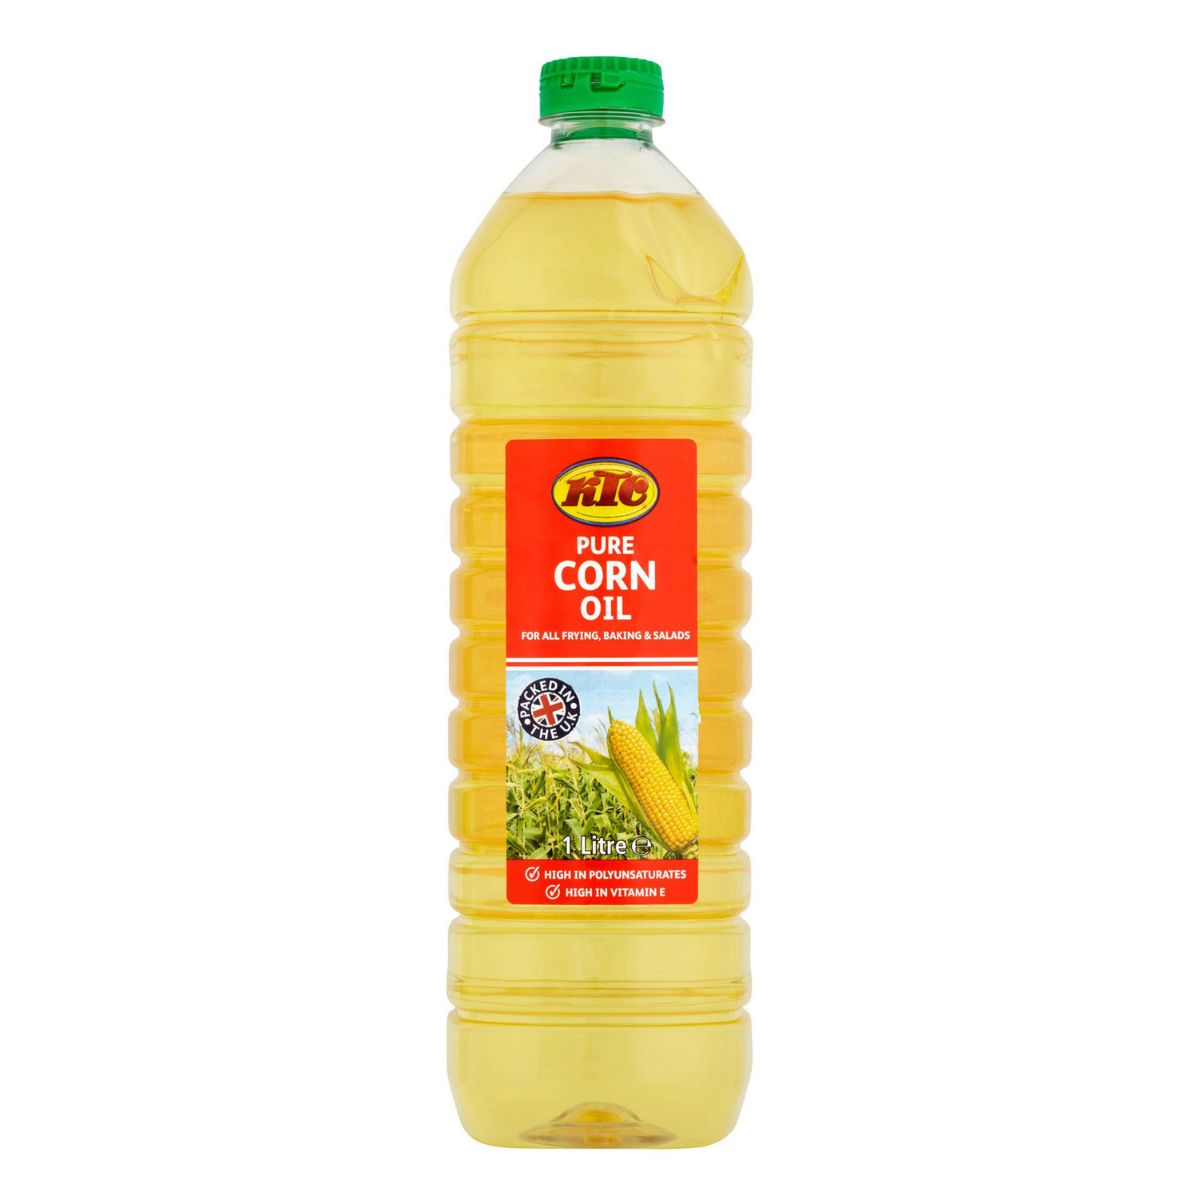 A bottle of KTC - Pure Corn Oil - 1L on a white background.